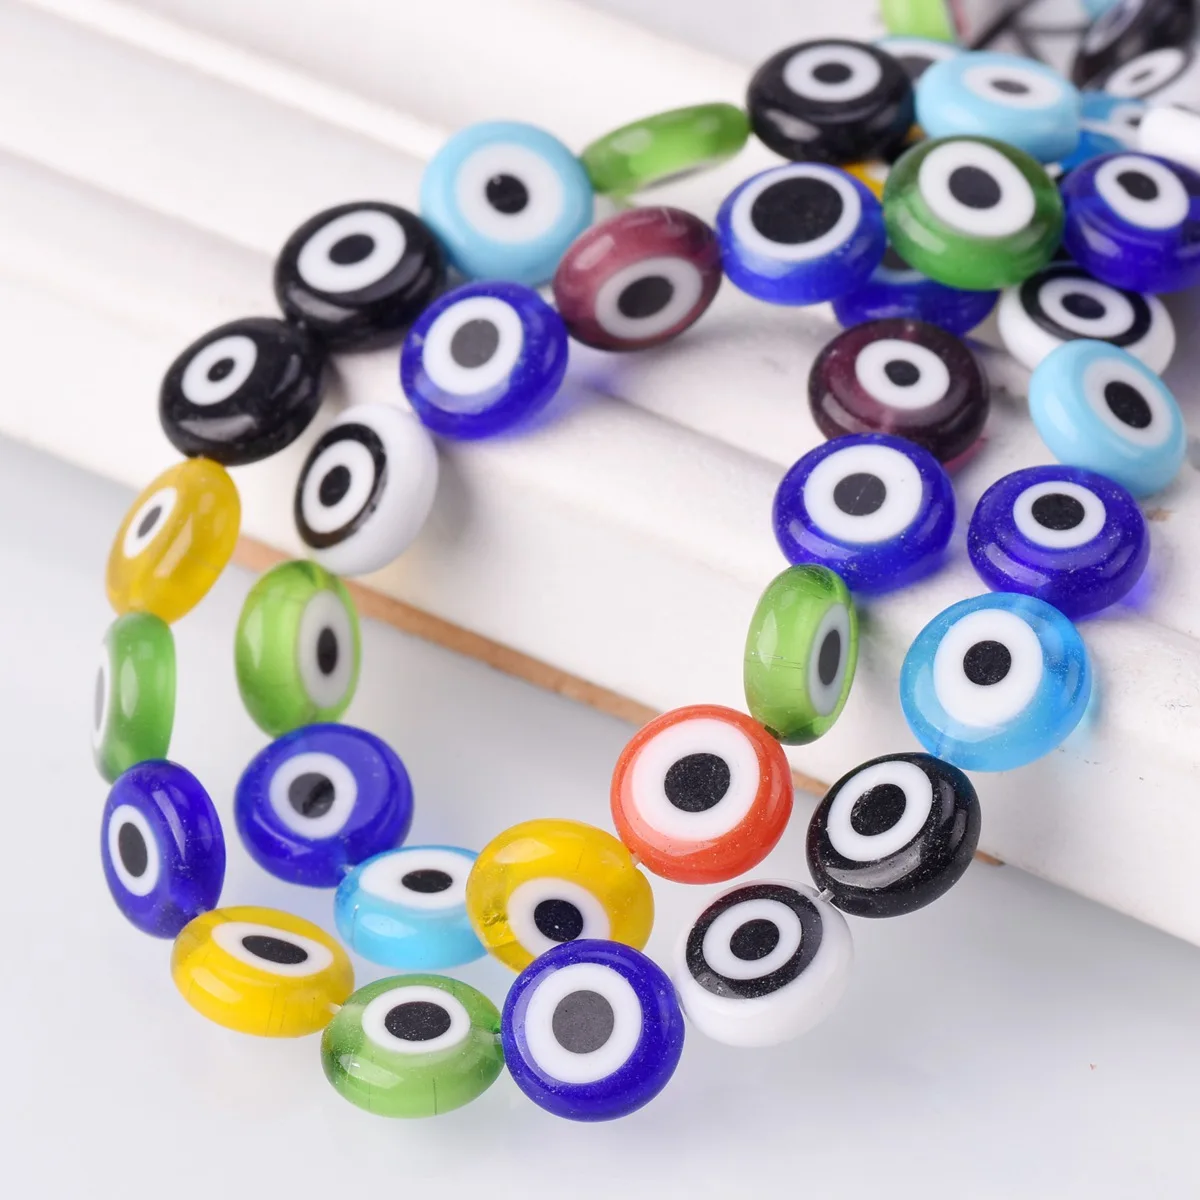 6mm 8mm 10mm 12mm Mixed Flat Round Evil Eye Millefiori Lampwork Glass Beads For Jewelry Making DIY Crafts Findings 25pcs flat round rondelle 12mm crystal glass rhinestones metal loose spacer beads for jewelry making diy crafts